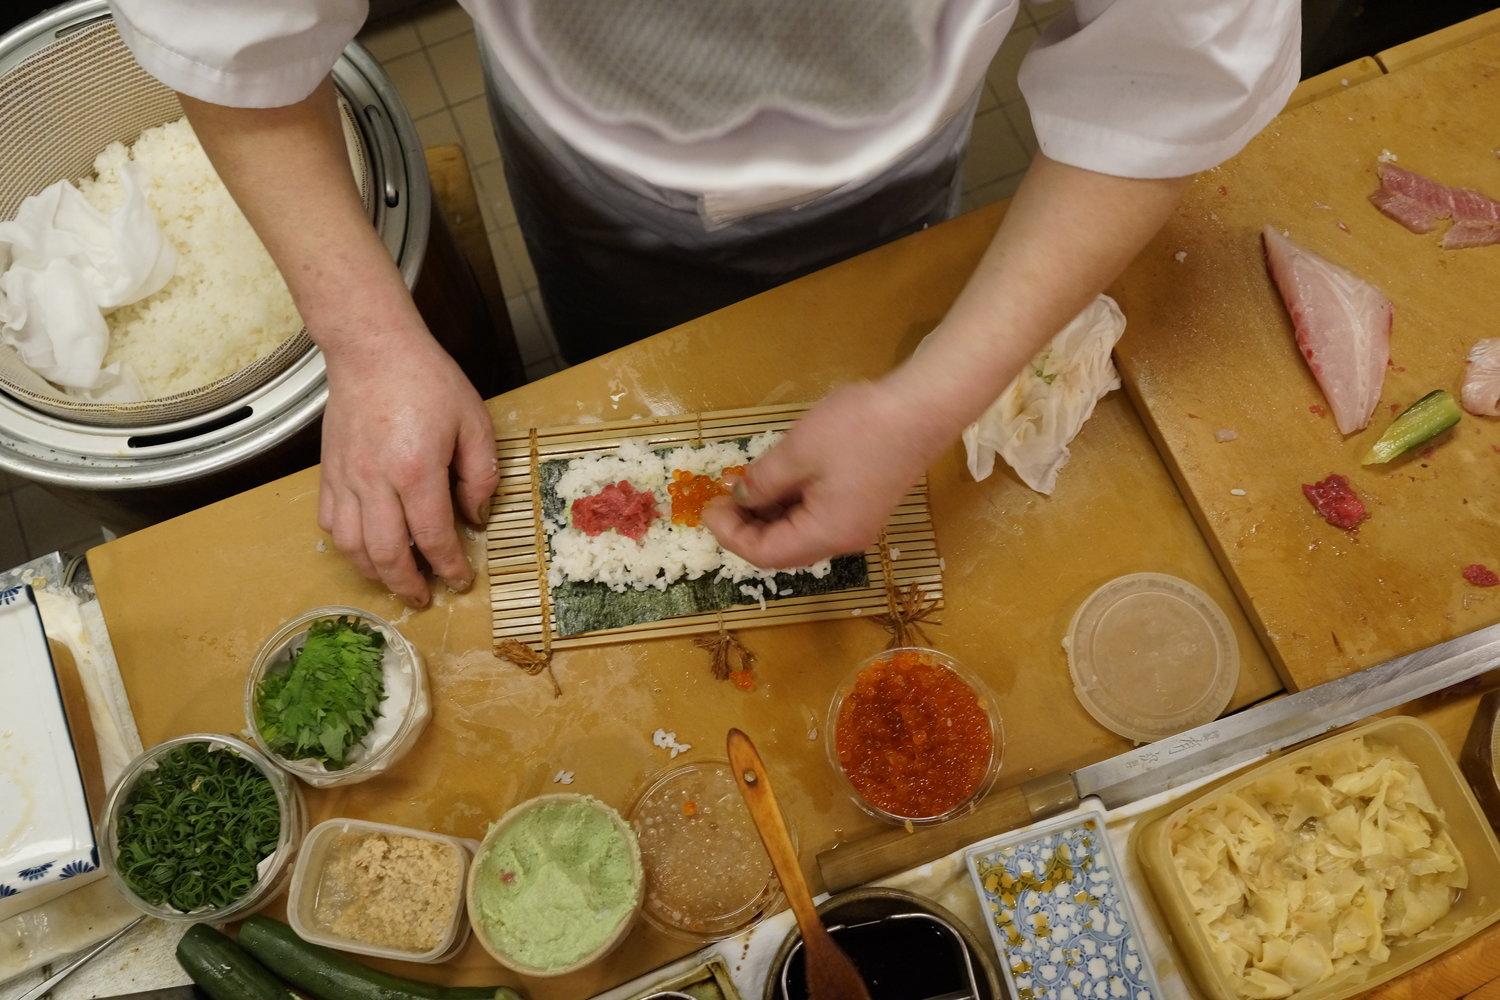 Chef Susumu Yajima carefully forms a delicious roll of sushi